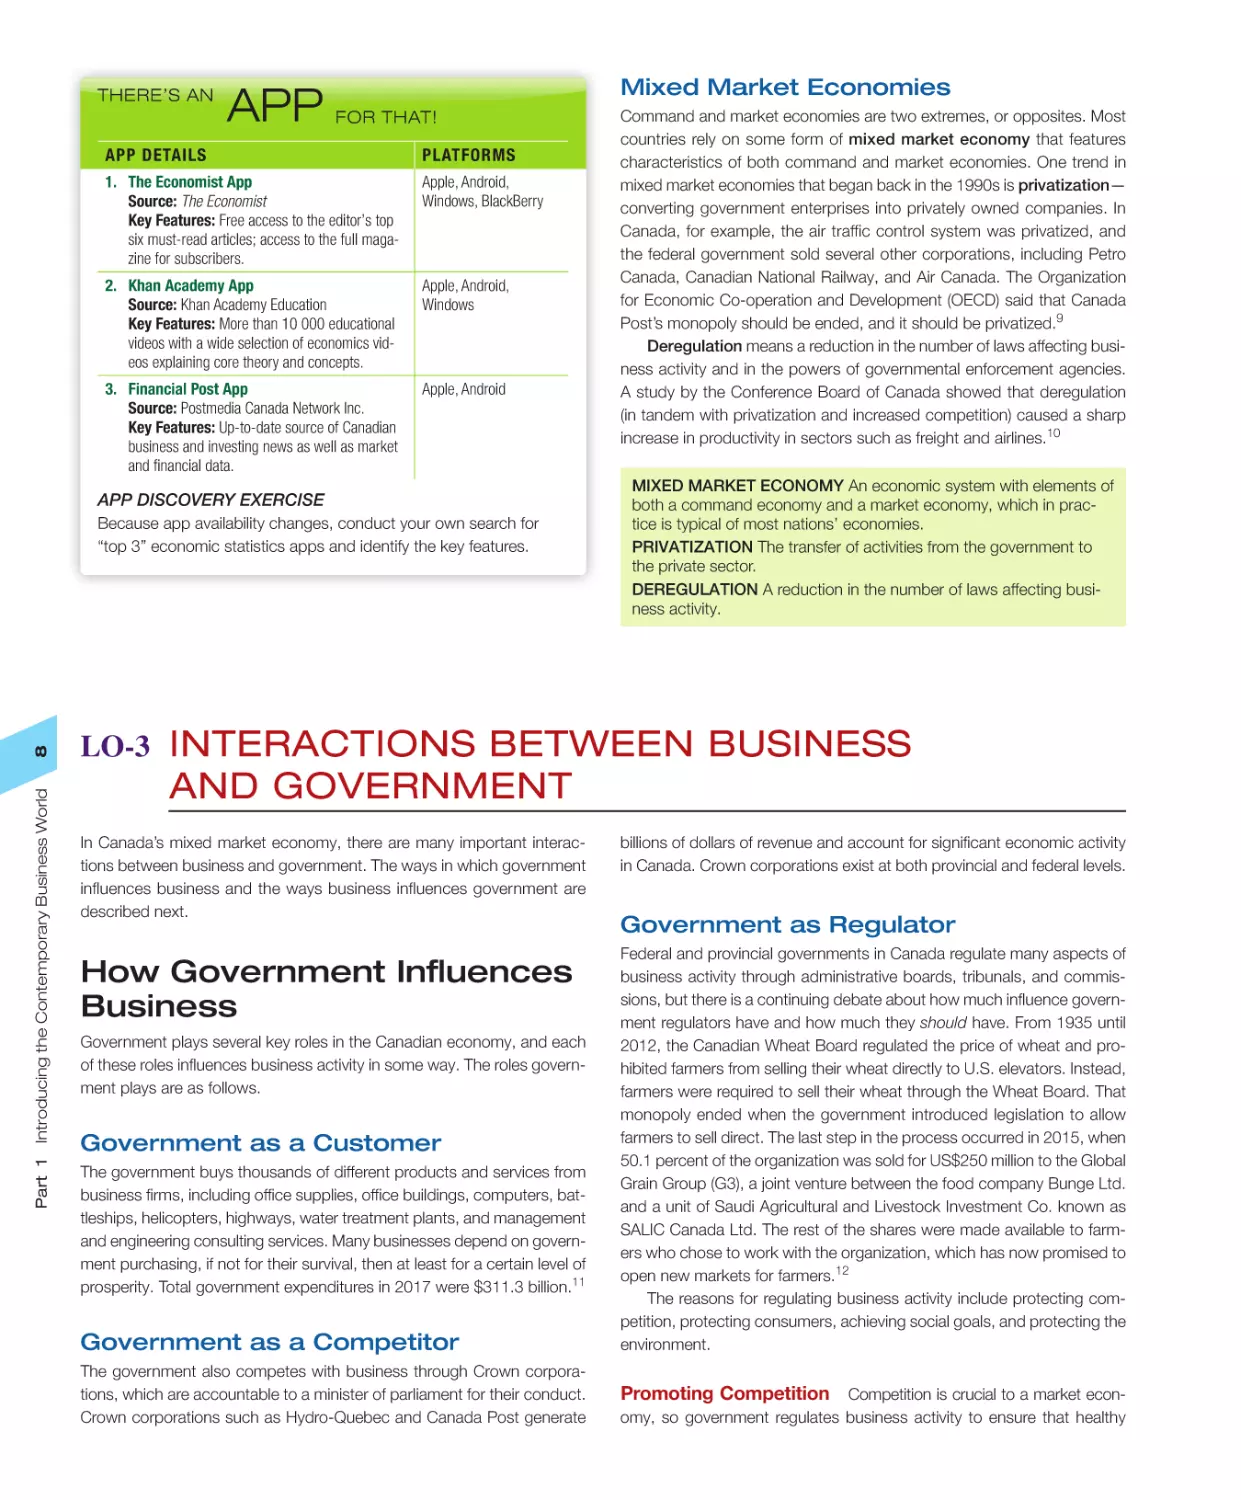 There’s an App for That!
LO‐3 Interactions between Business and Government